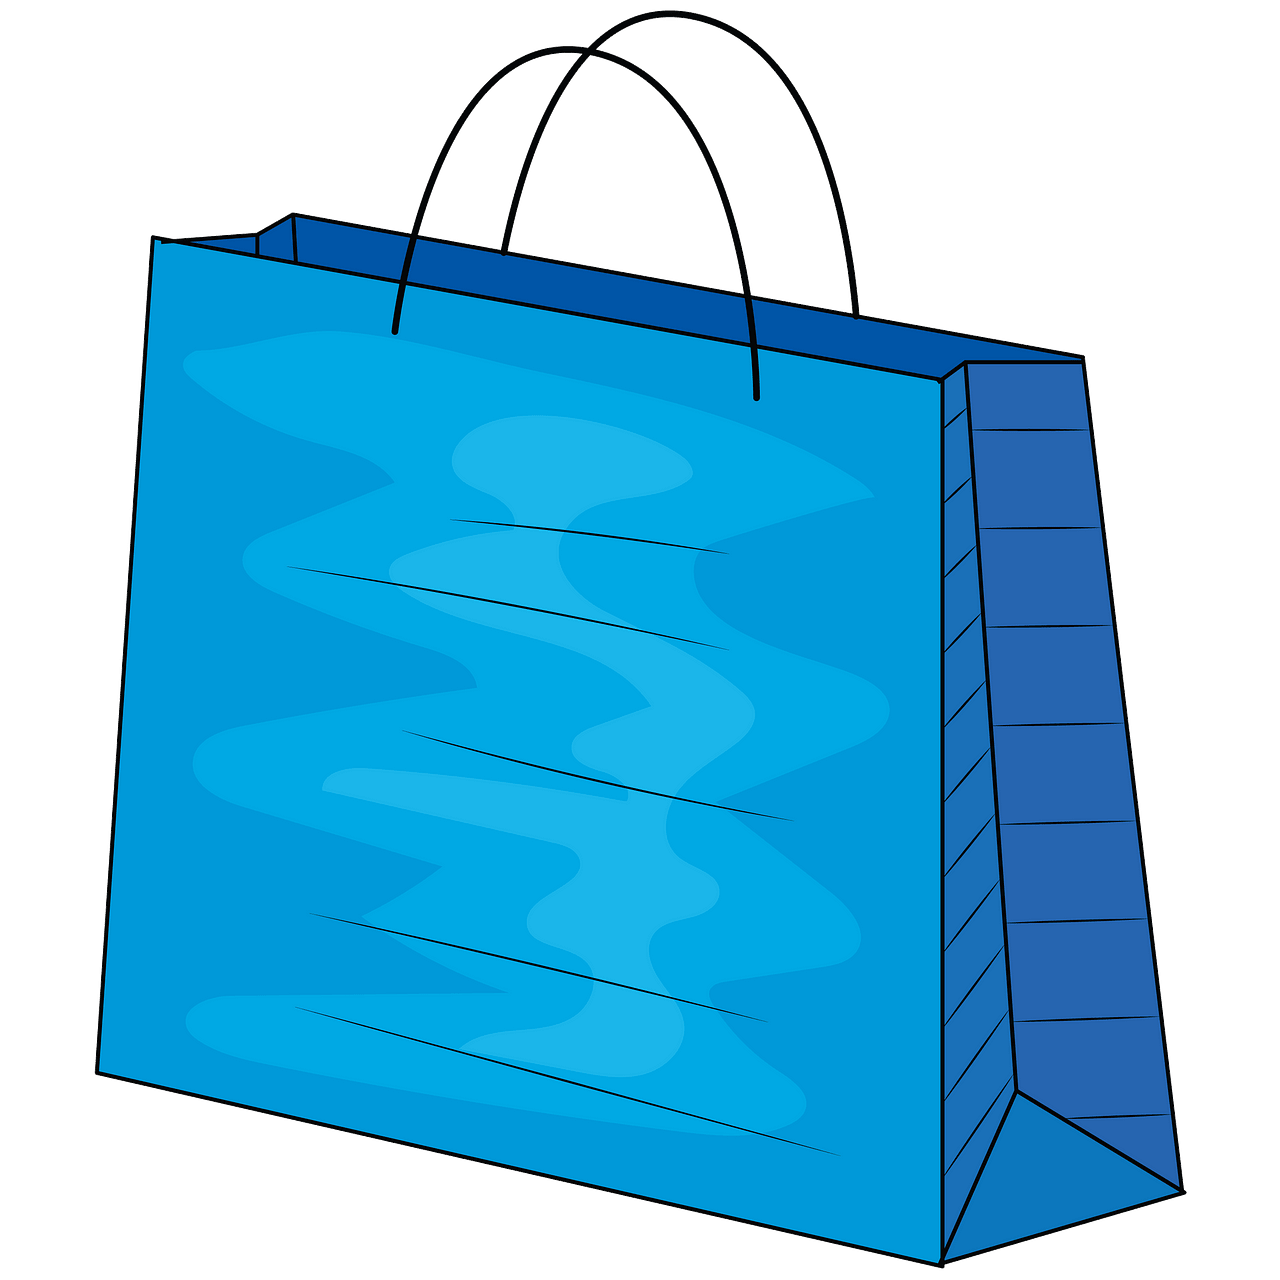 Purse Vector & Graphics to Download